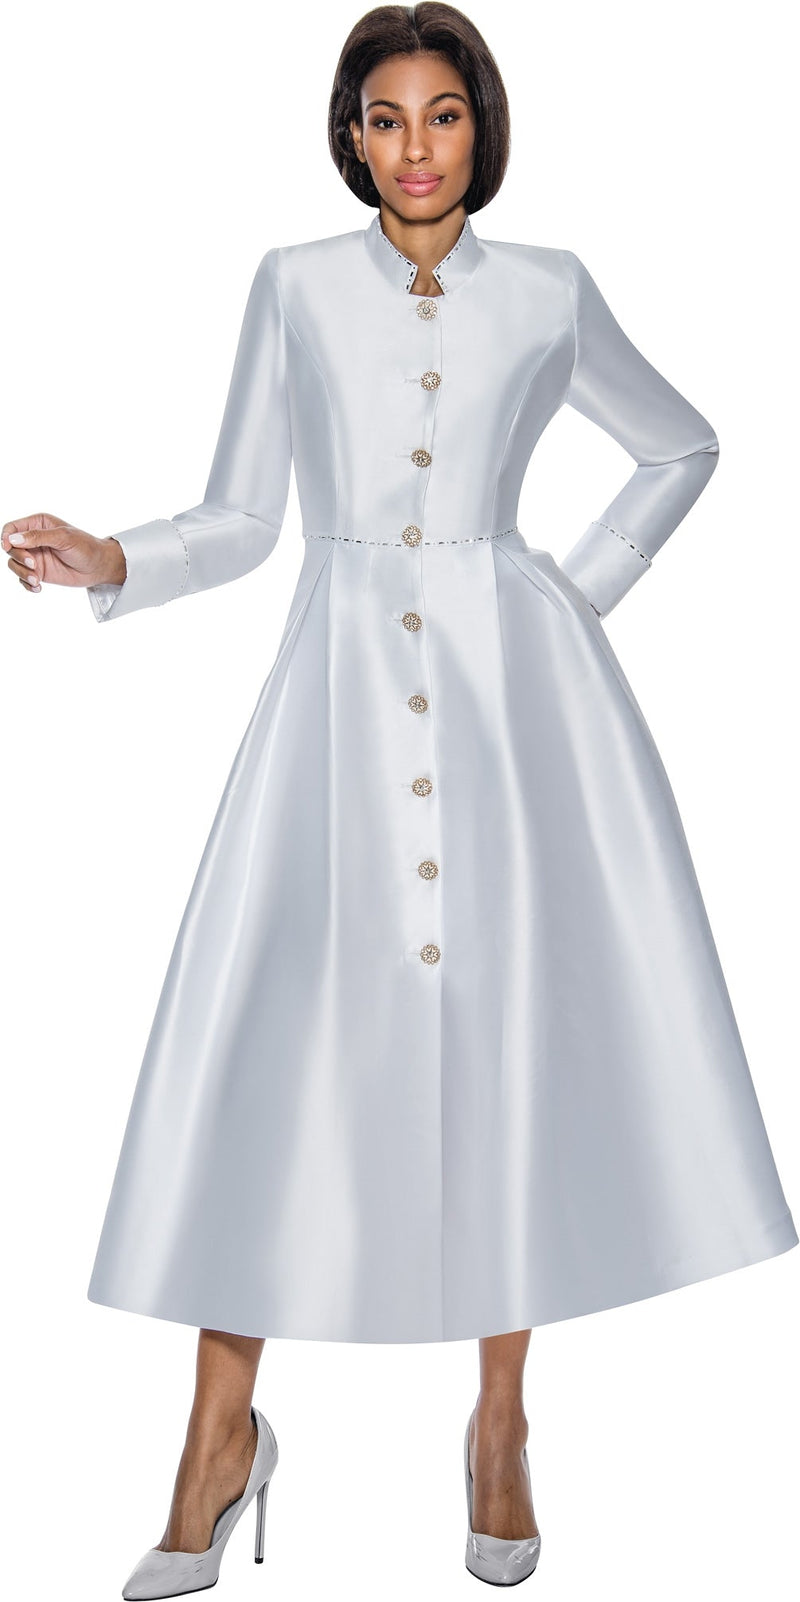 Terramina Clergy Dress 7058-White - Church Suits For Less